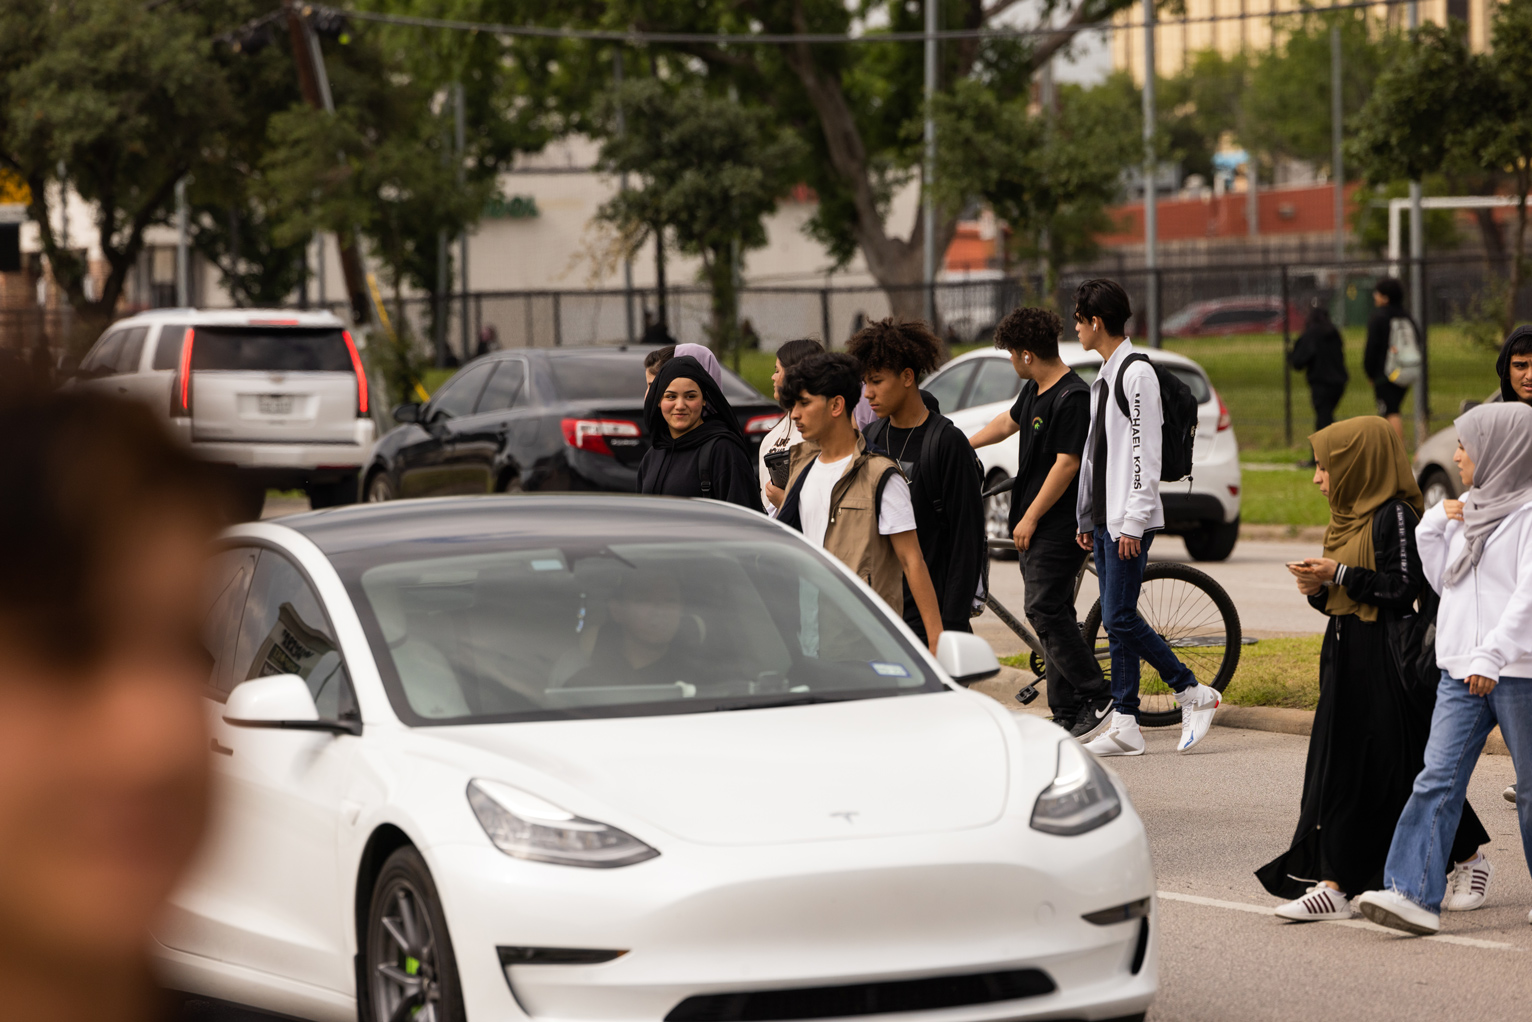 Students try to cross a busy street